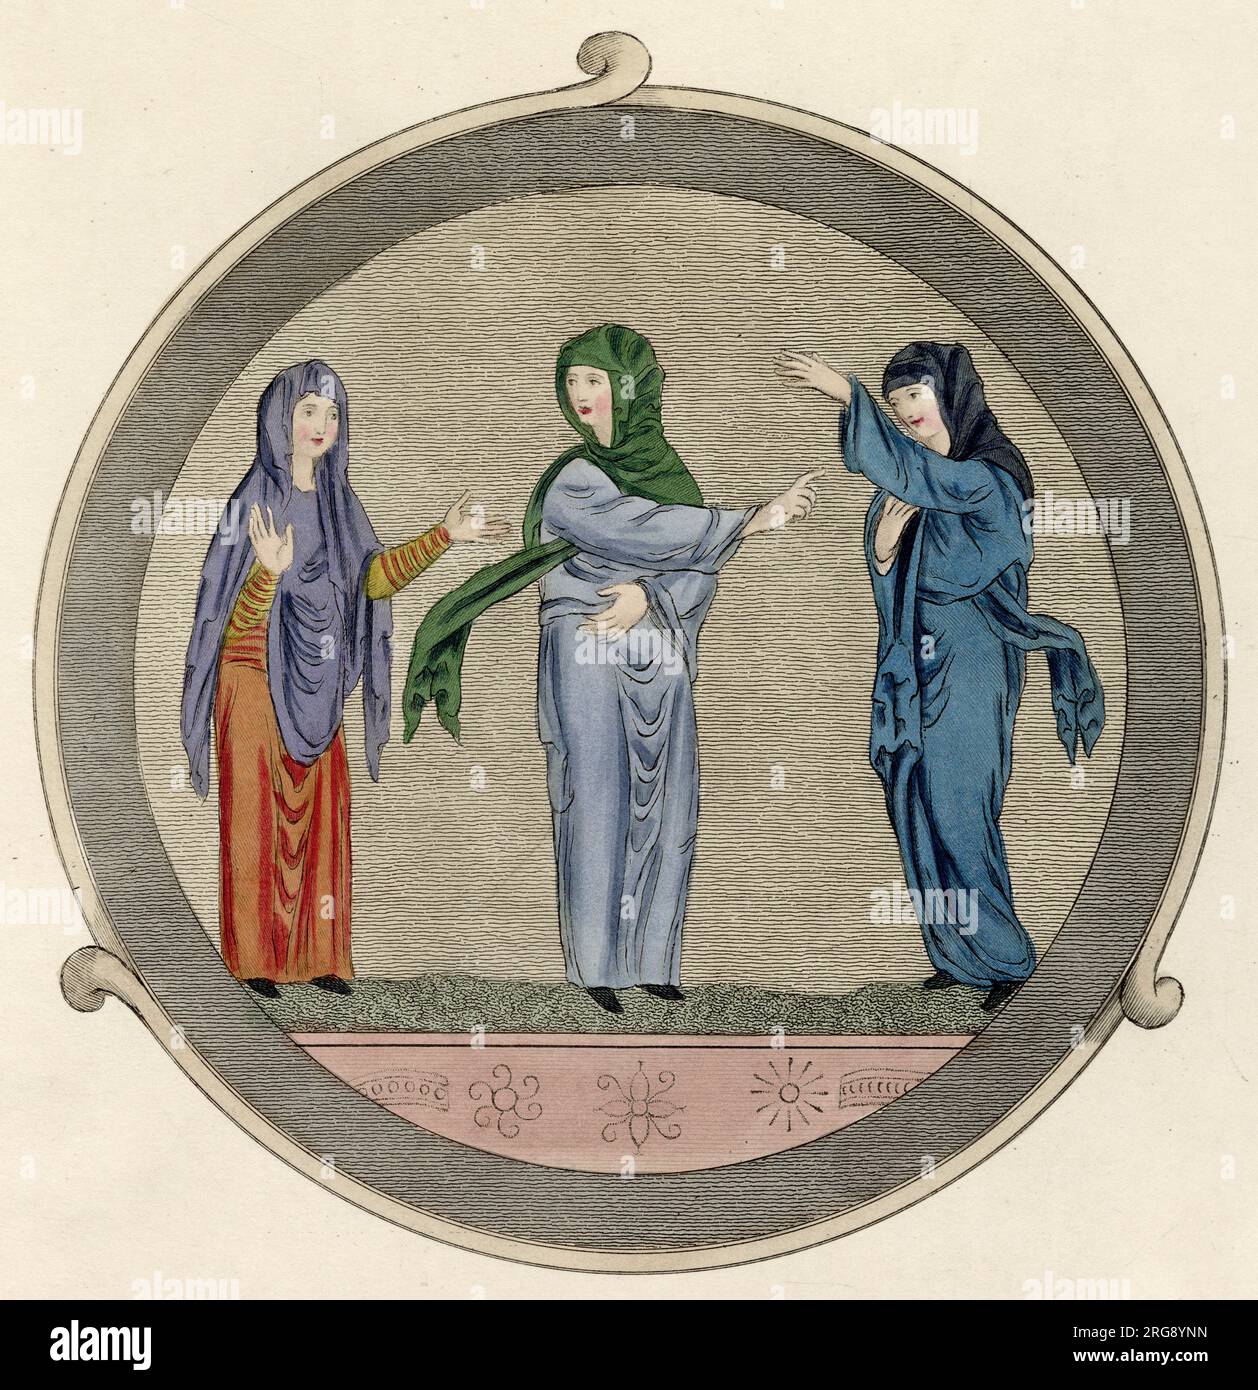 Anglo-Saxon women wearing long tunics & super-tunics or rocs. The end of the sash style girdle is visible on the right. Head rails or veils completely cover the hair. Stock Photo